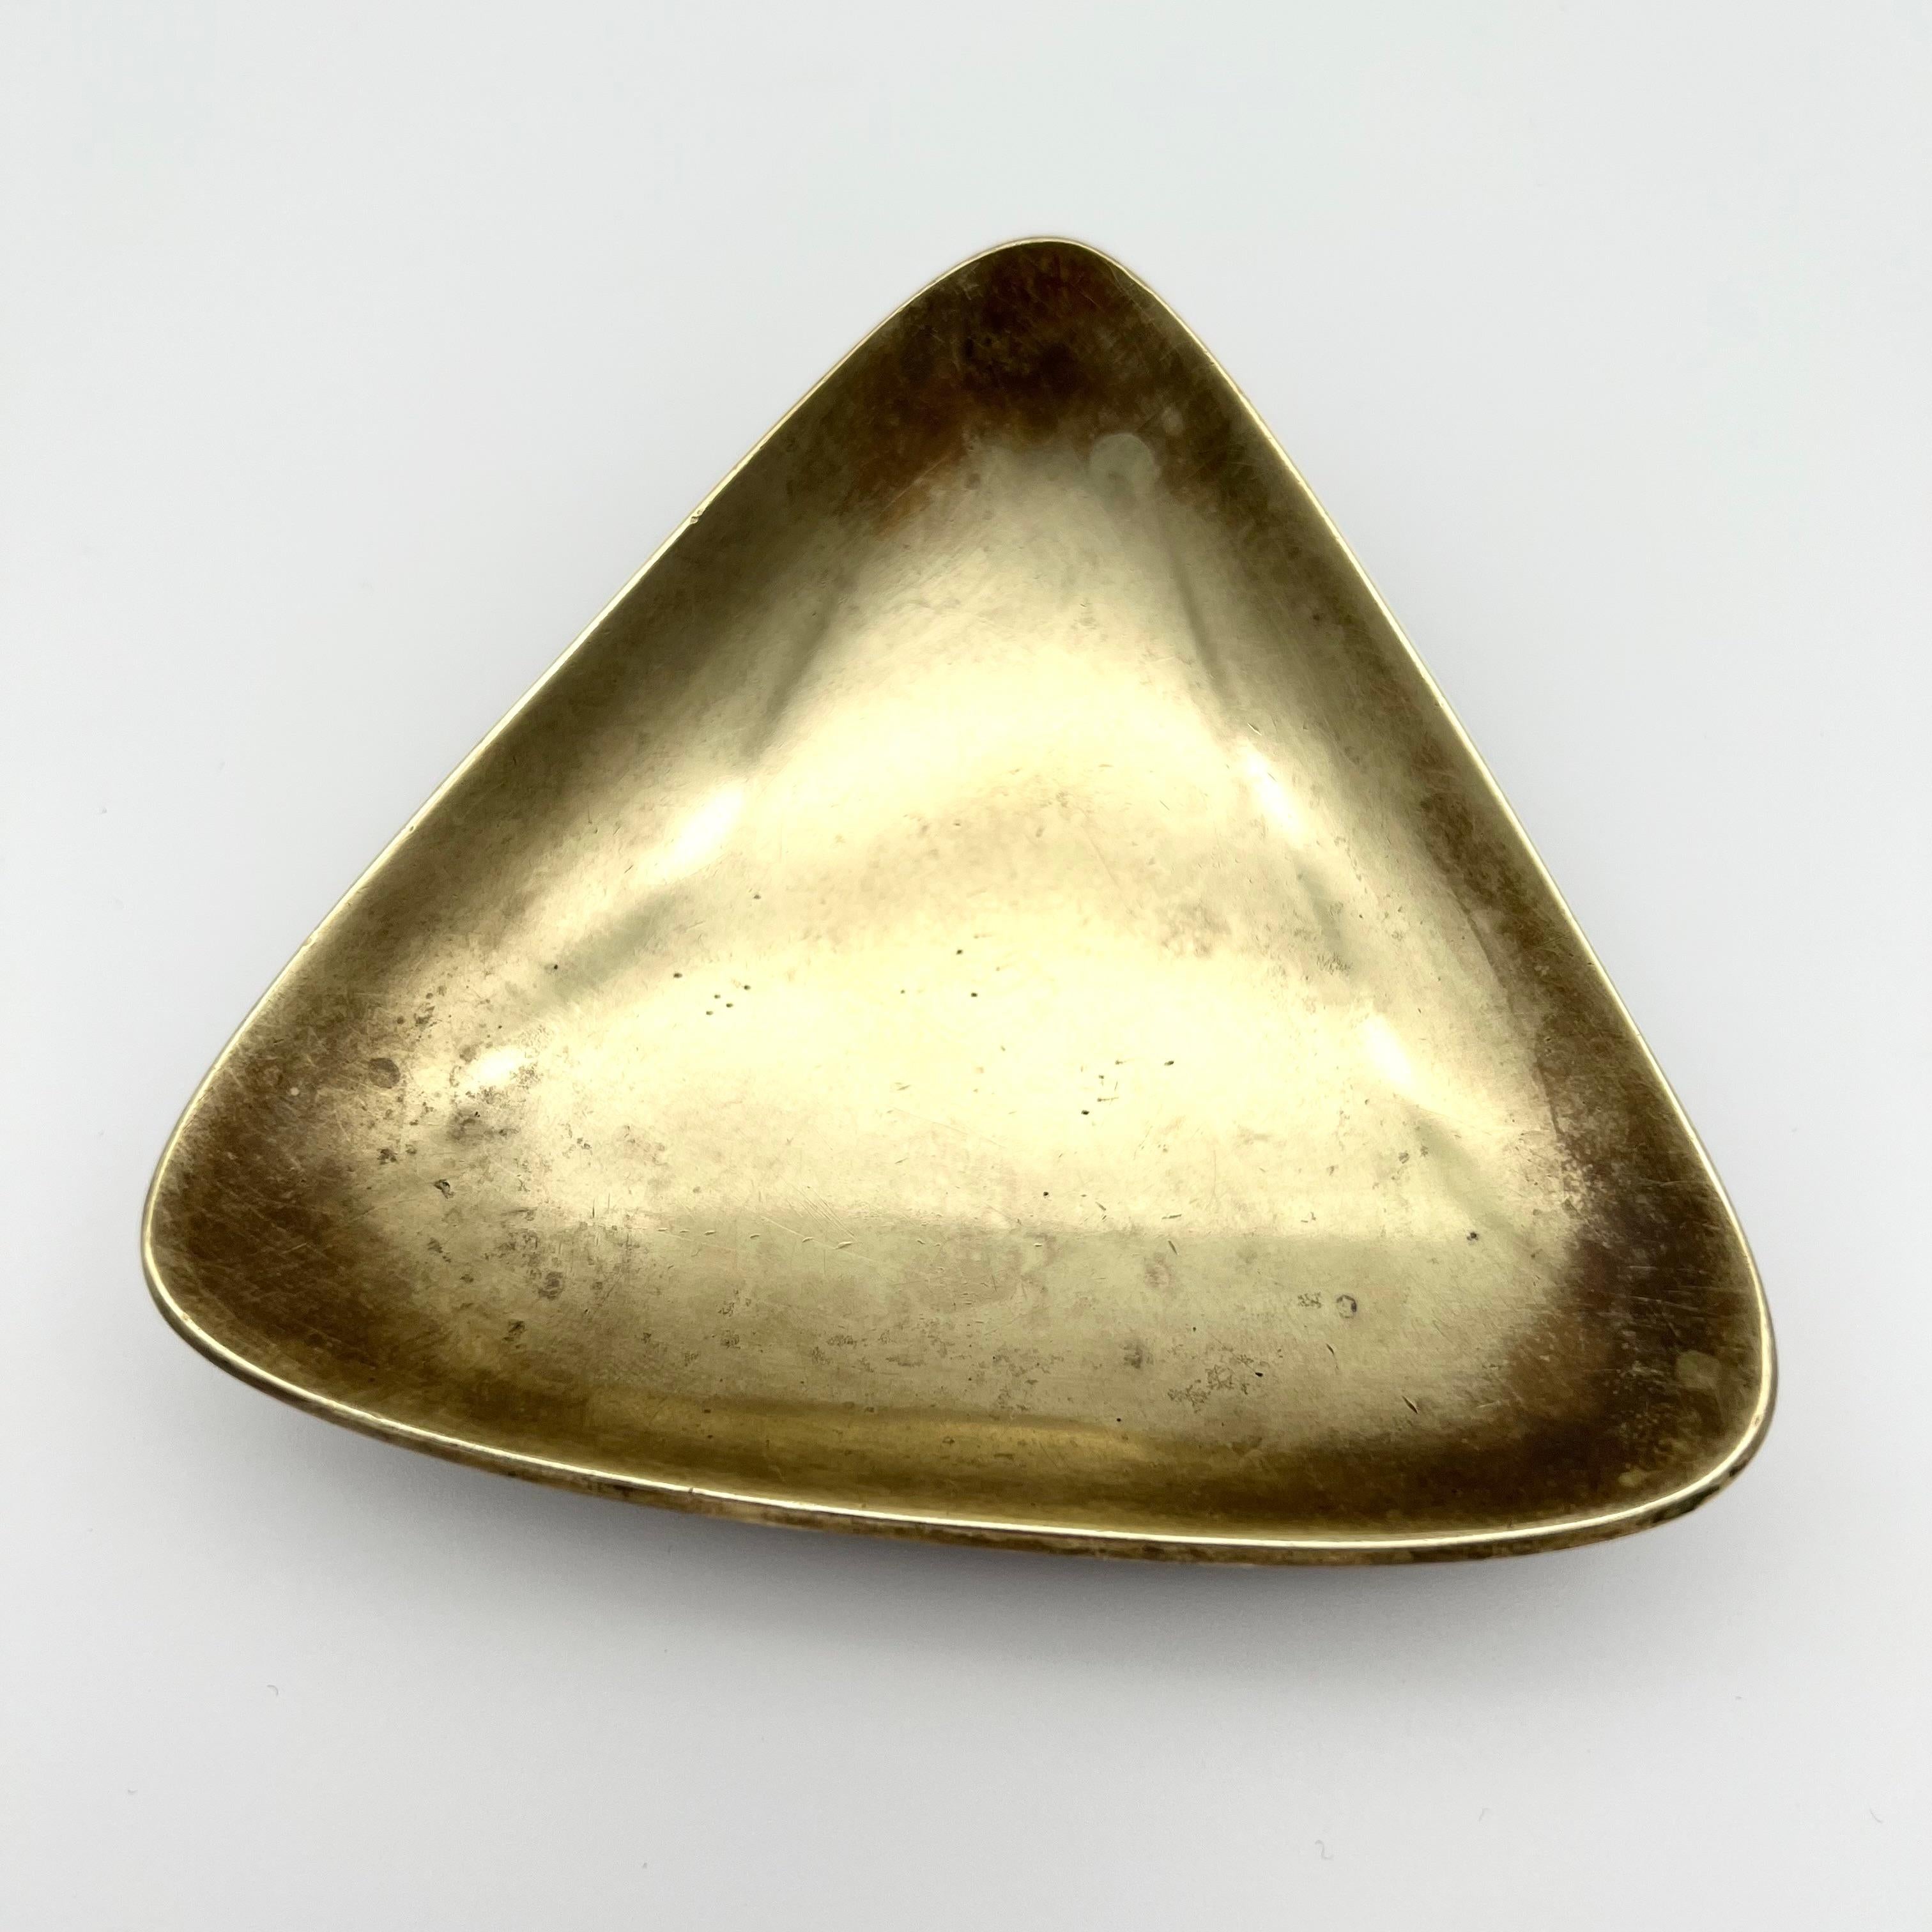 Mid-Century Modern Solid Brass Triangular Ashtray, Made by Carl Aubock in the 1950s in Vienna